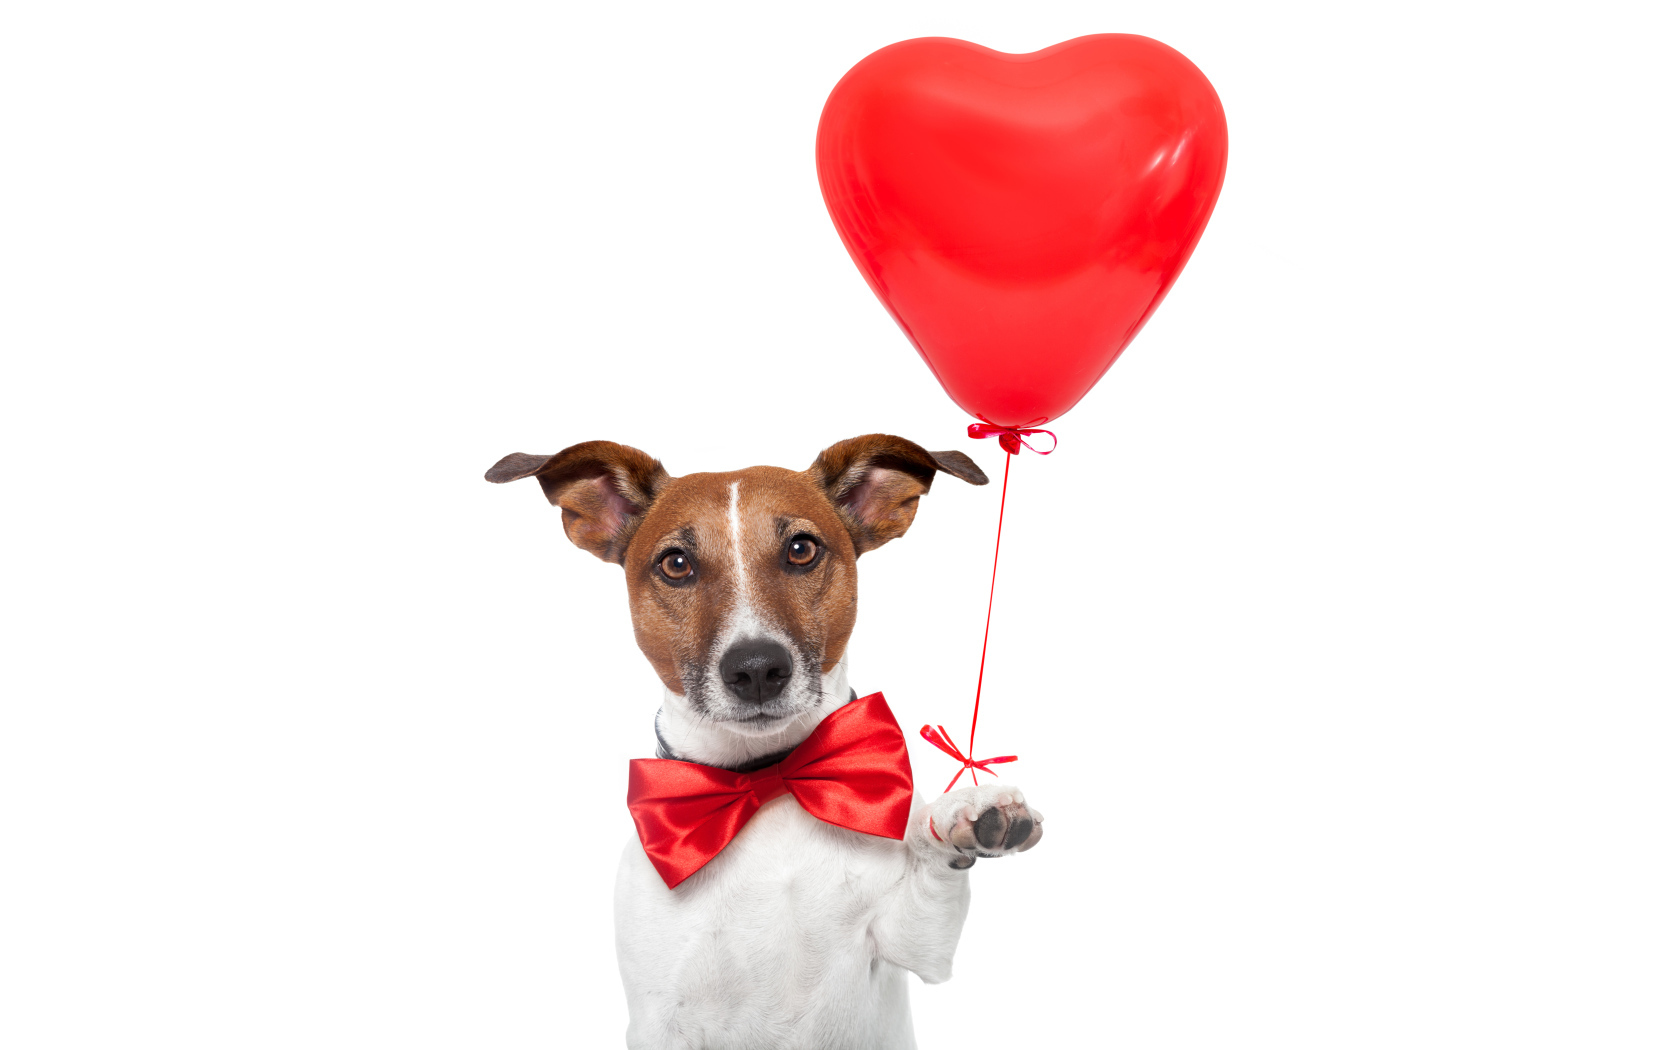 Jack Russell Terrier with a red heart-shaped balloon on a white background